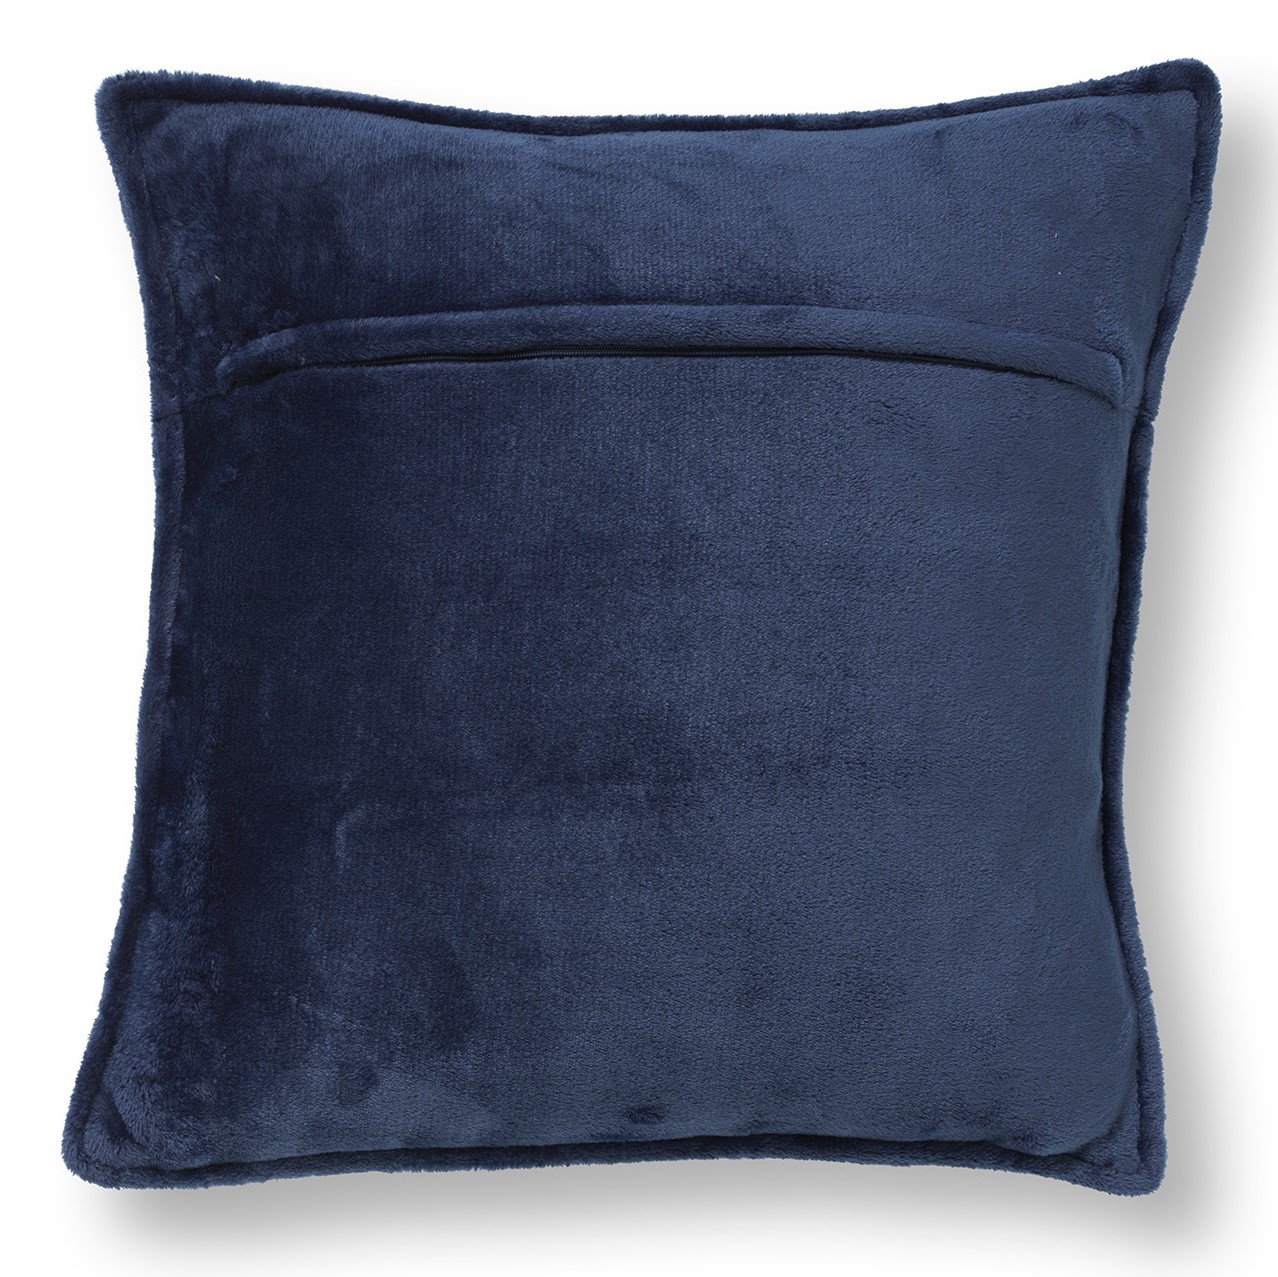 CILLY - Kussenhoes fleece 45x45 cm - Insignia Blue - donkerblauw